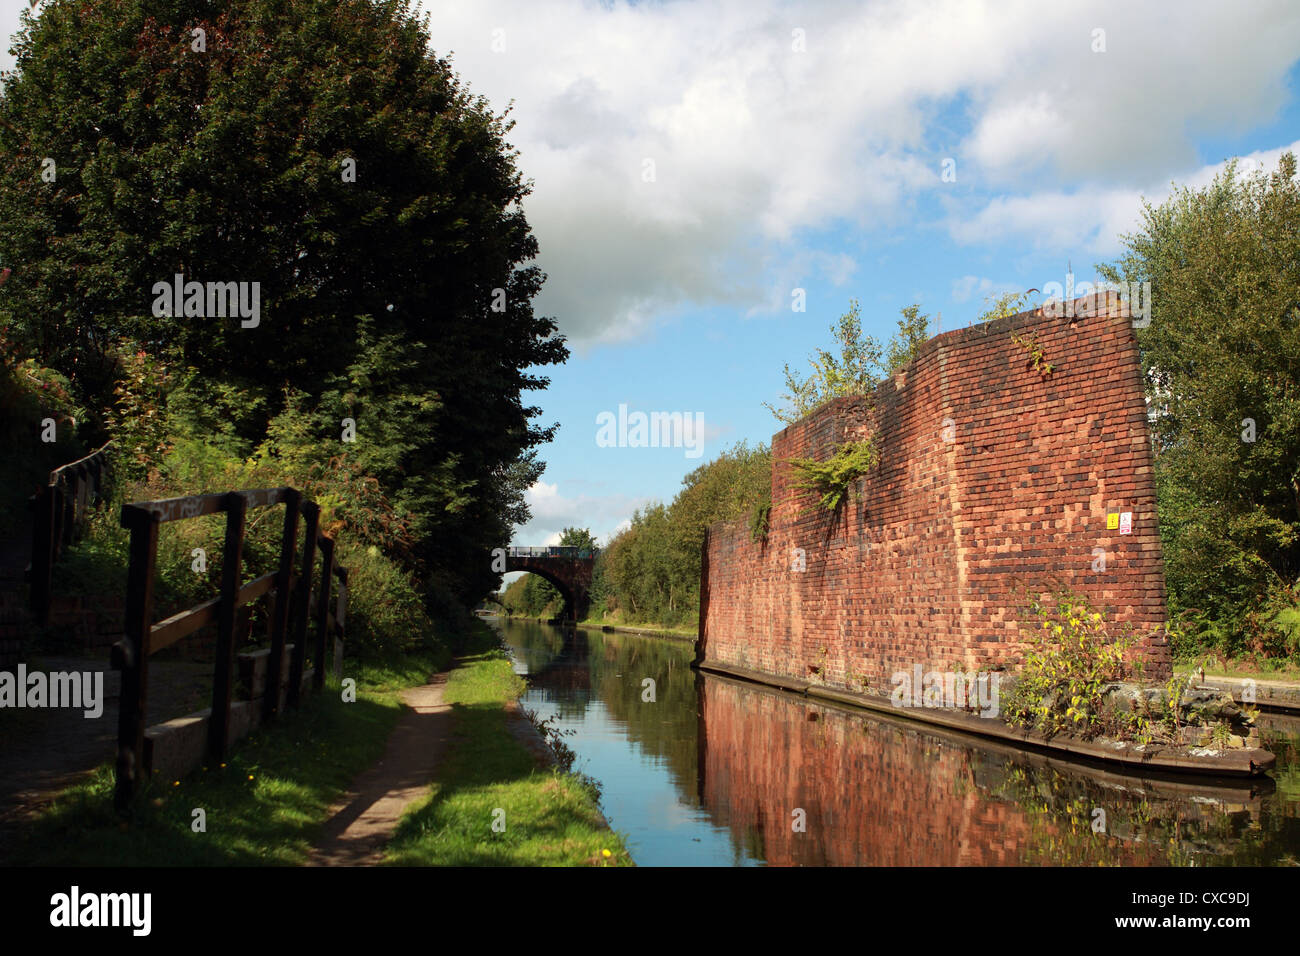 A view along one of the Birmingham canals in England Stock Photo